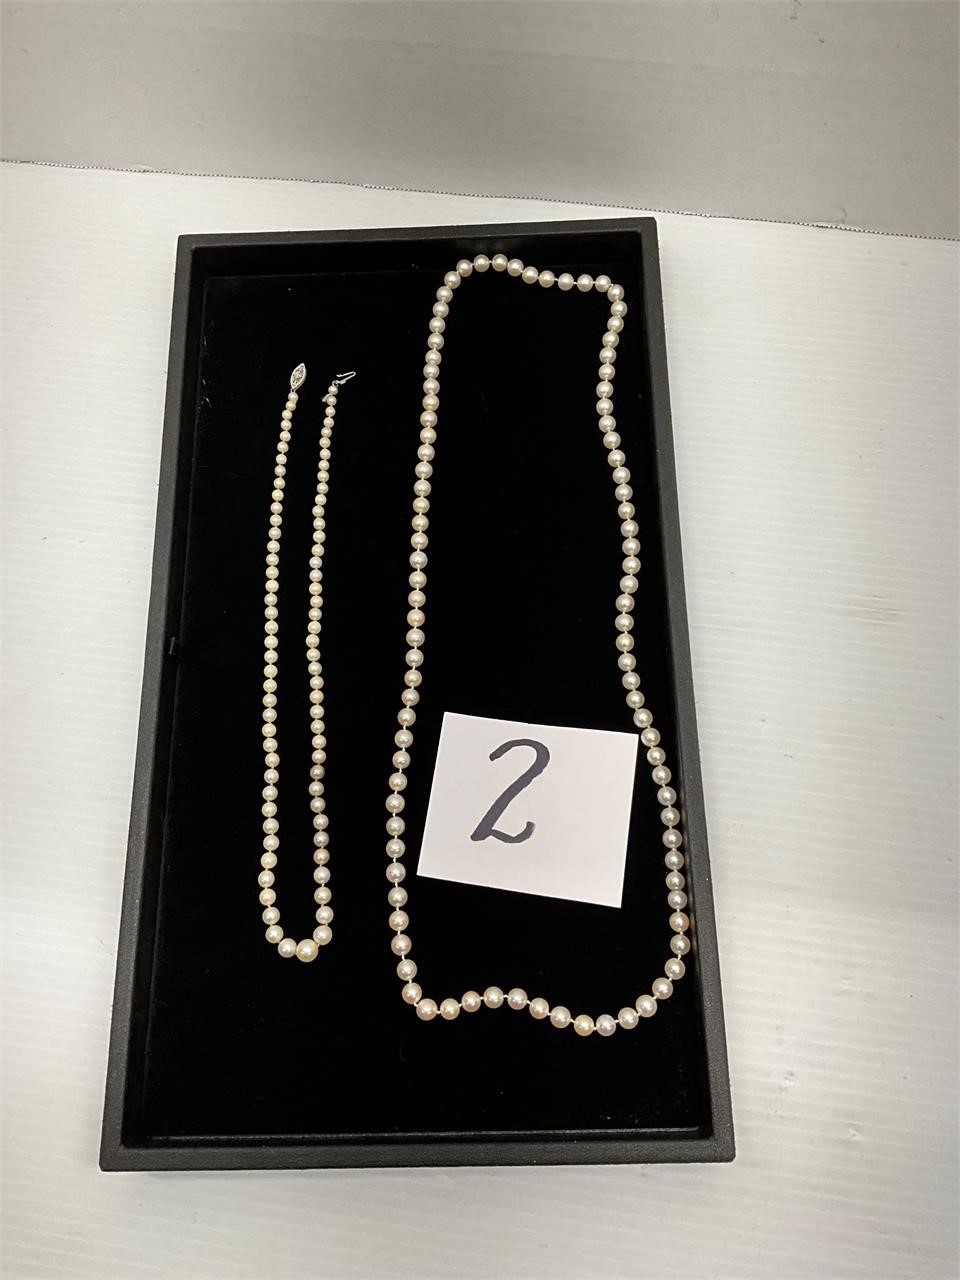 Lot of 2 Pearl Necklaces 14k White Gold & Clasp